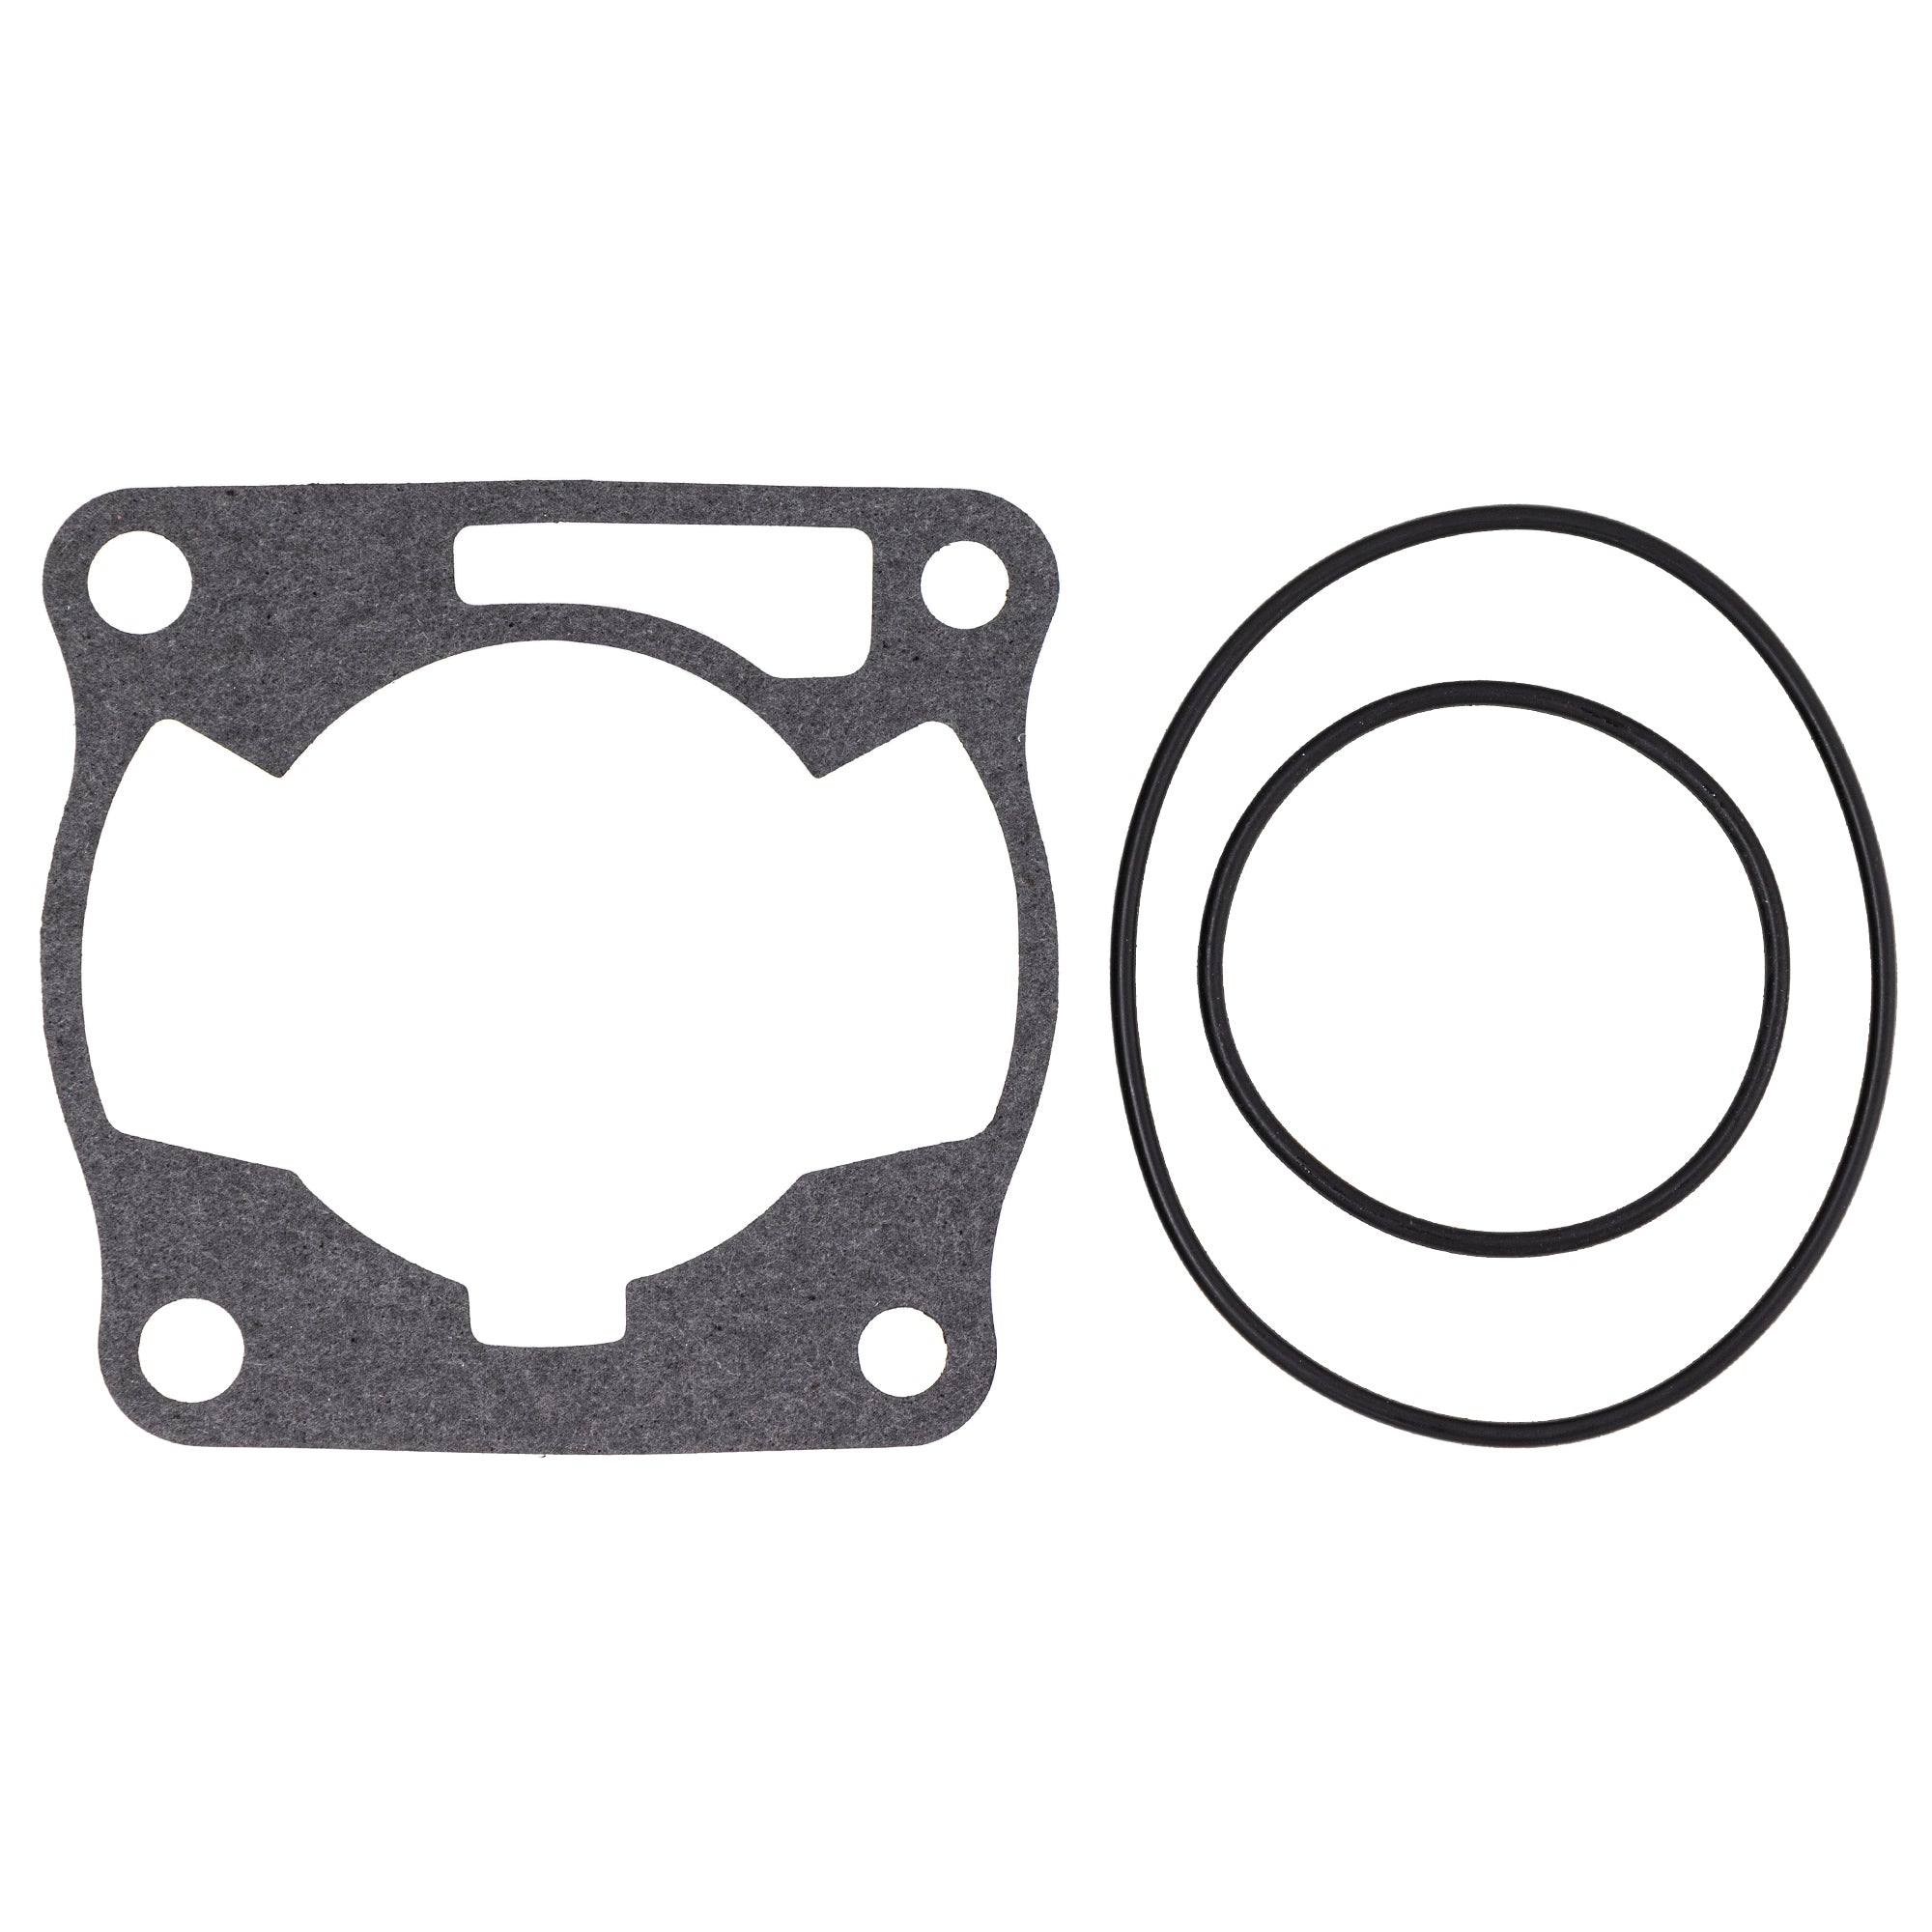 Wiseco Piston Cylinder Gasket Top End Kit for Yamaha YZ80 YZ85